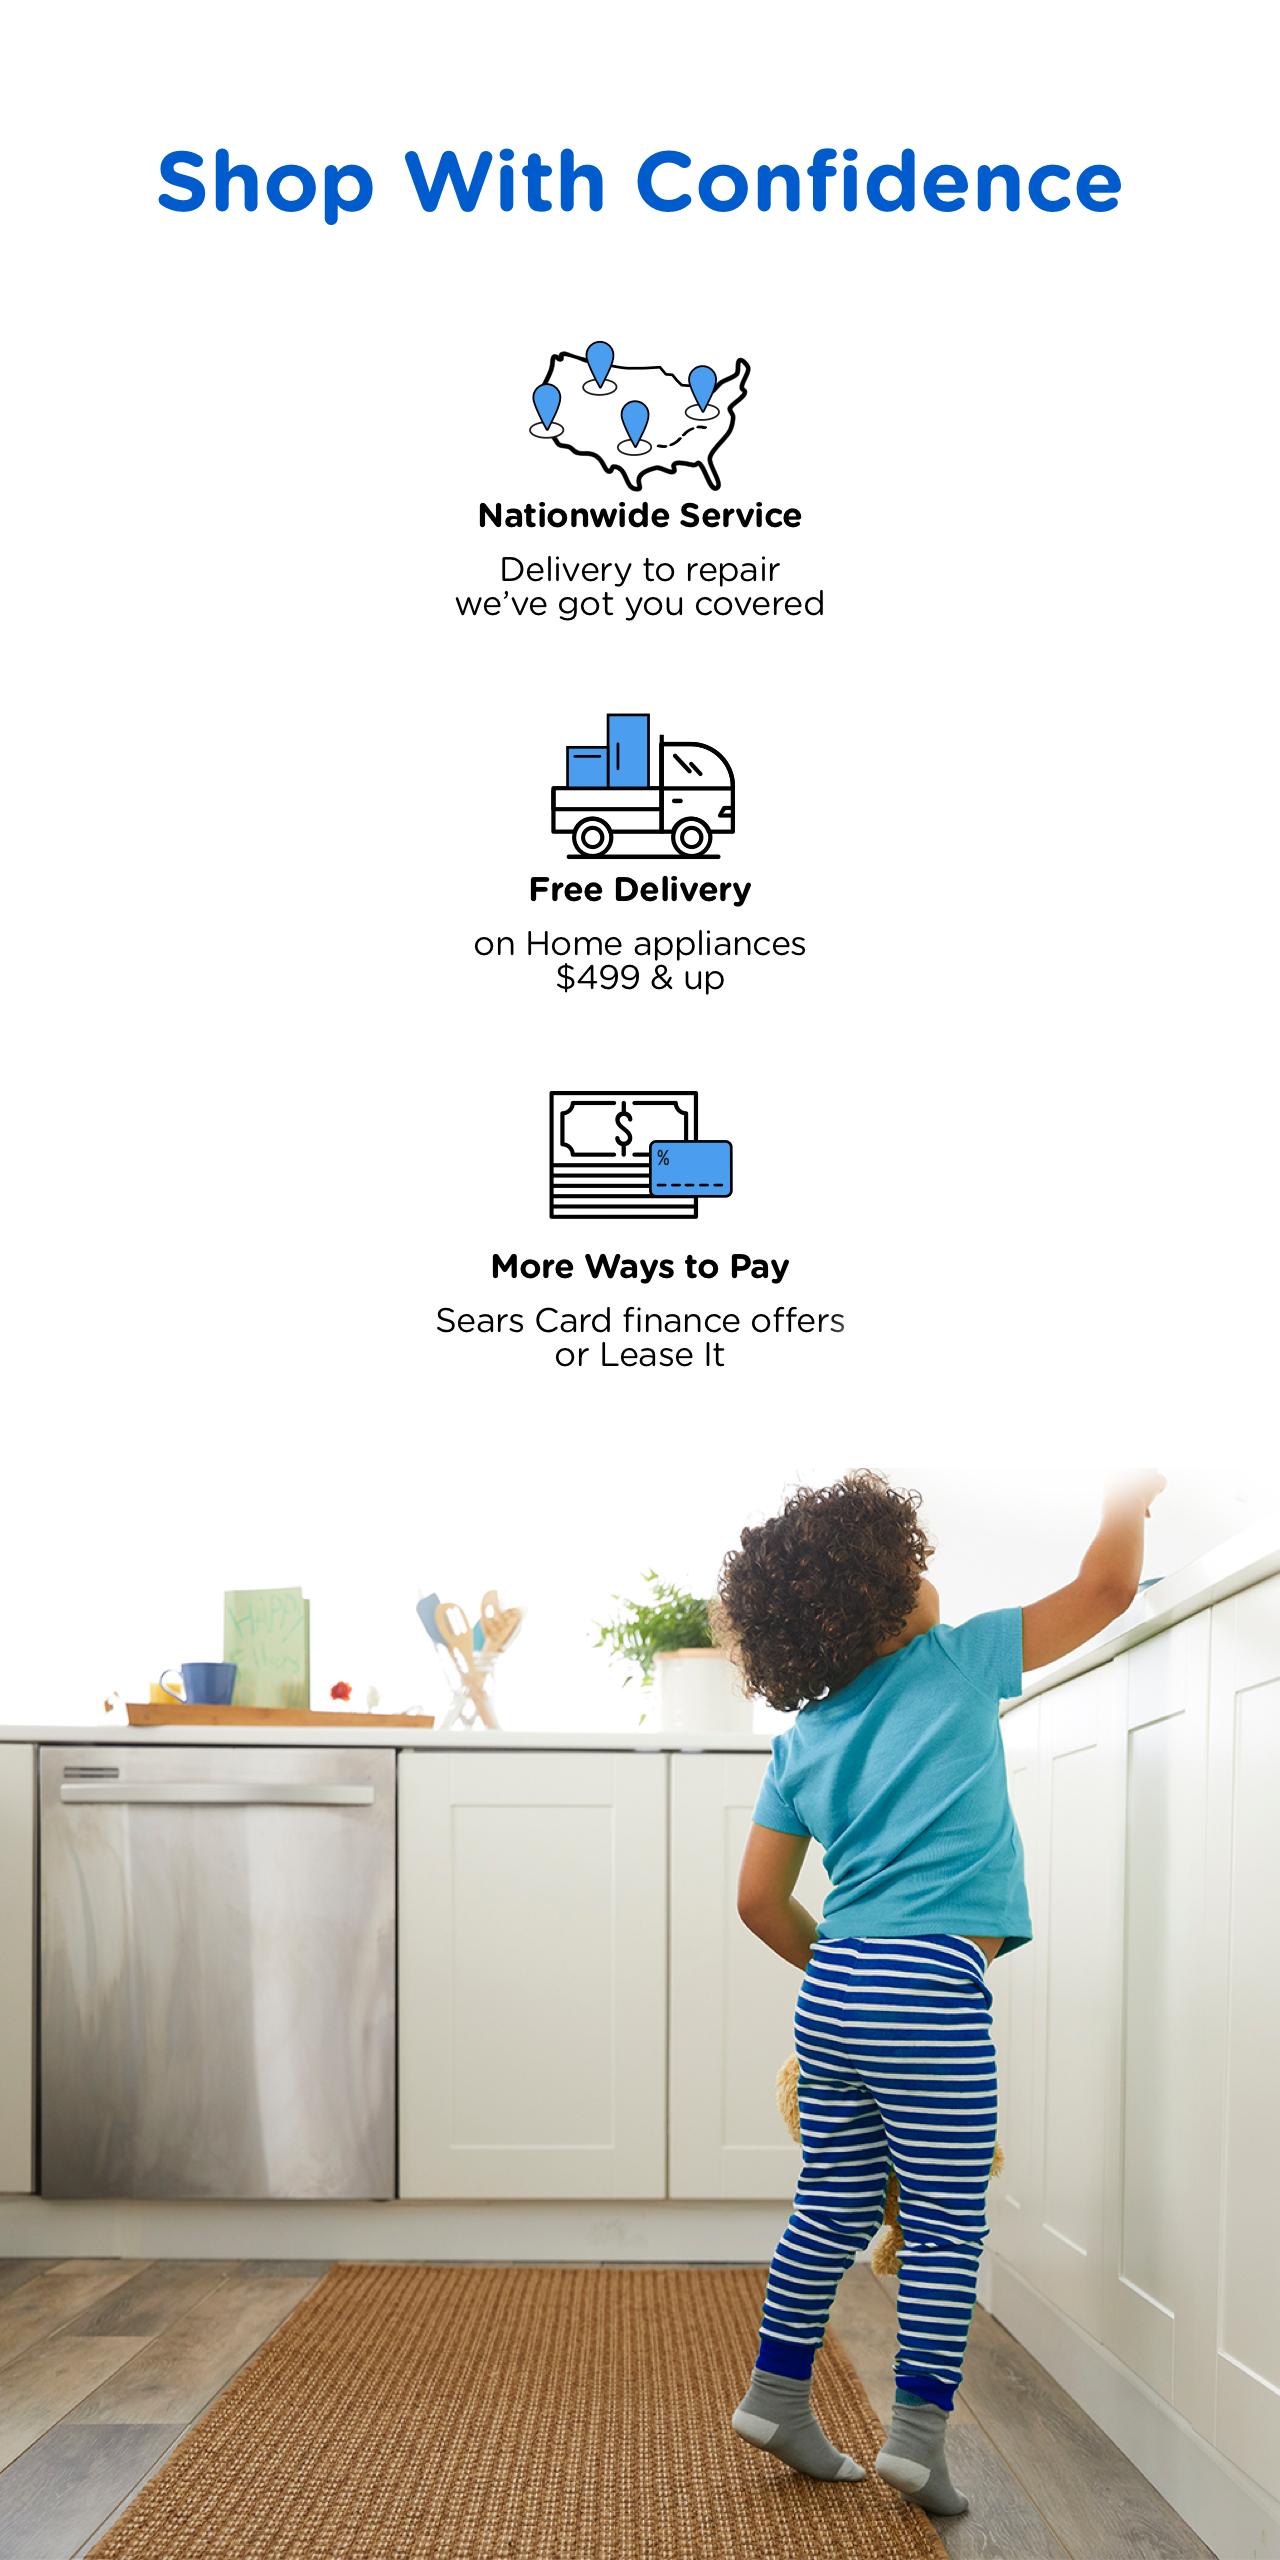 Sears – Shop smarter, faster & save more